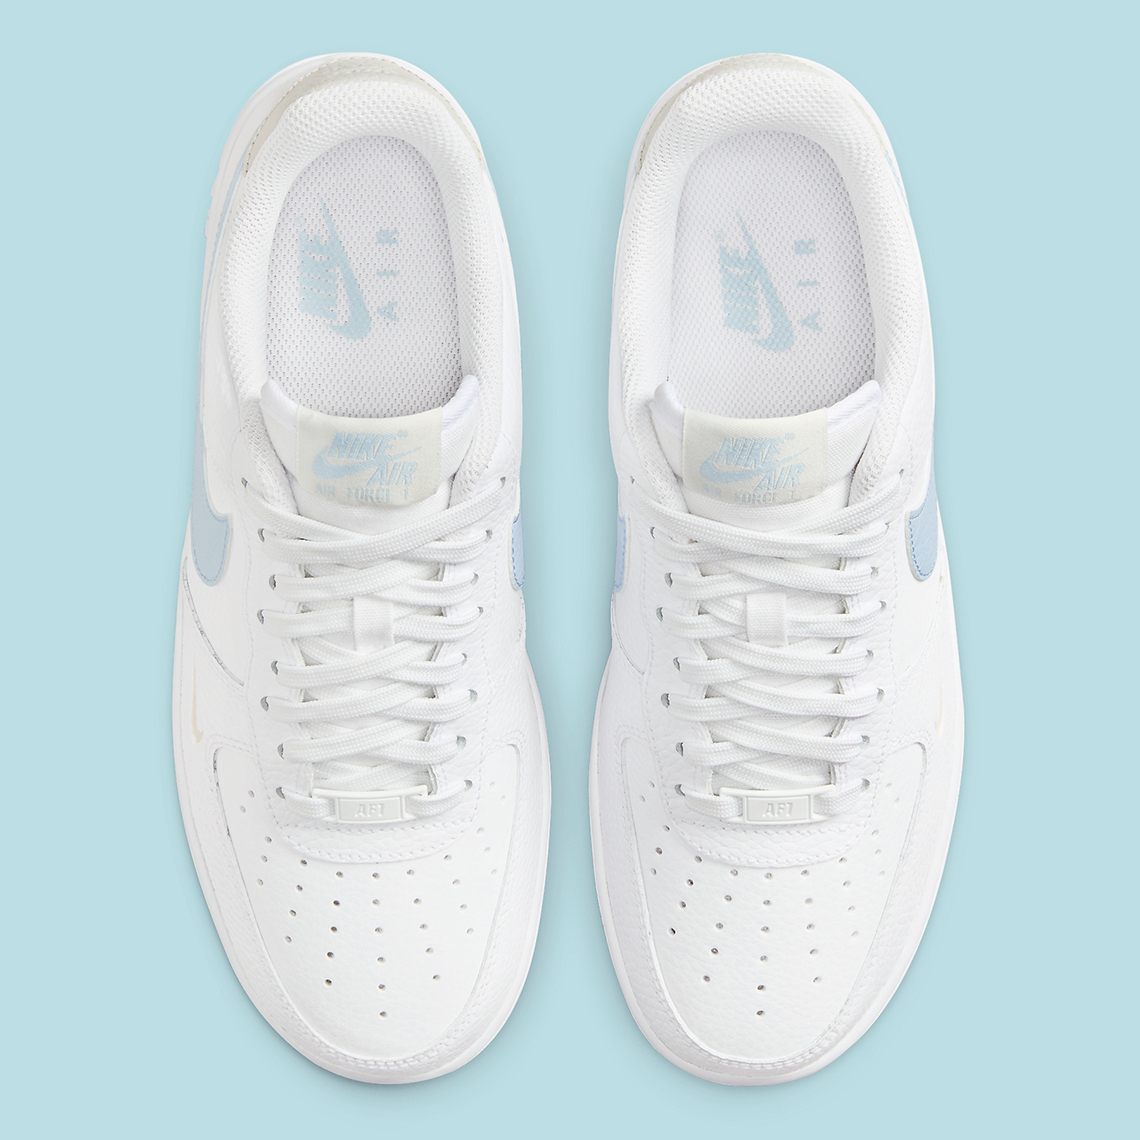 nike air force 1 low white grey blue hf0022 100 8